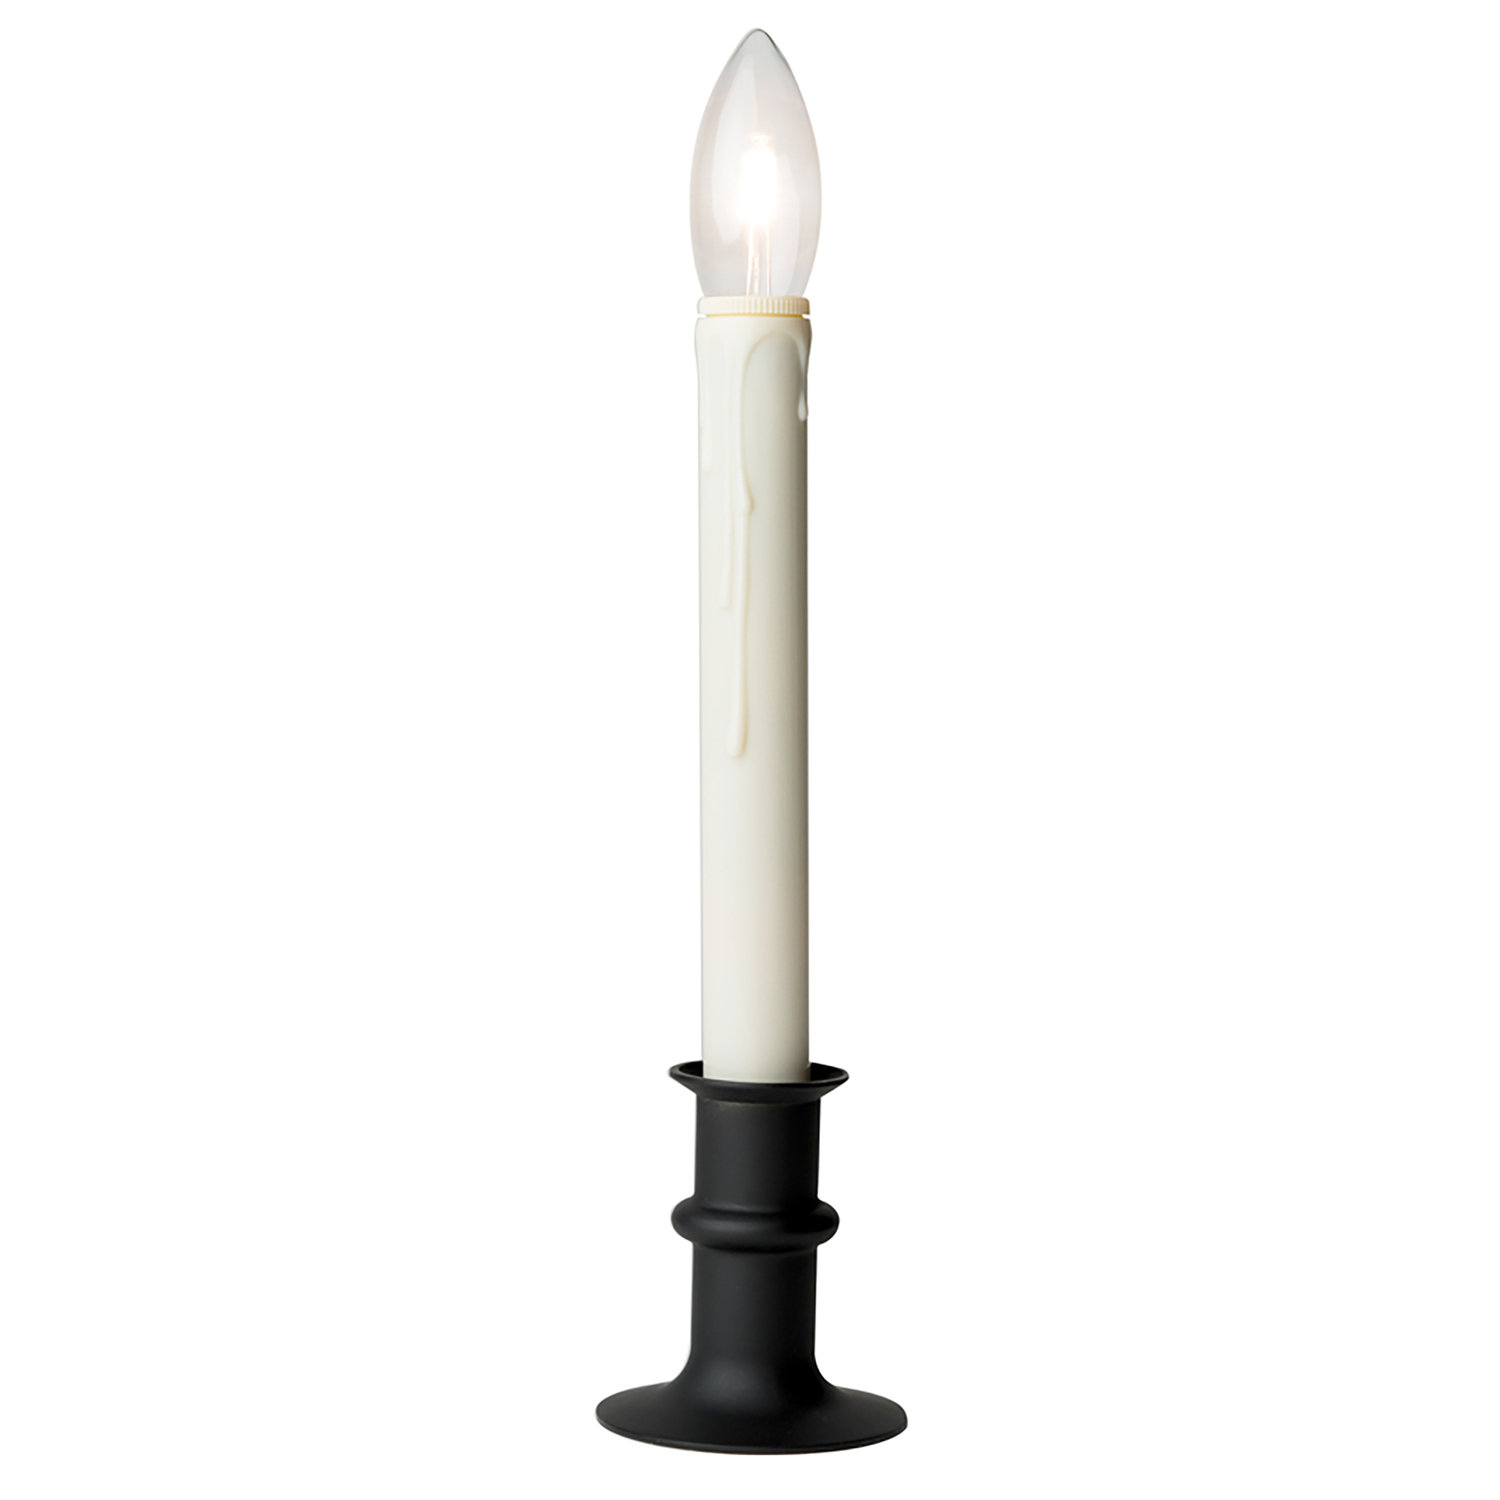 Stonebriar Indoor and Outdoor 10 Vintage Metal and Glass Candle Lantern,  Off-White 